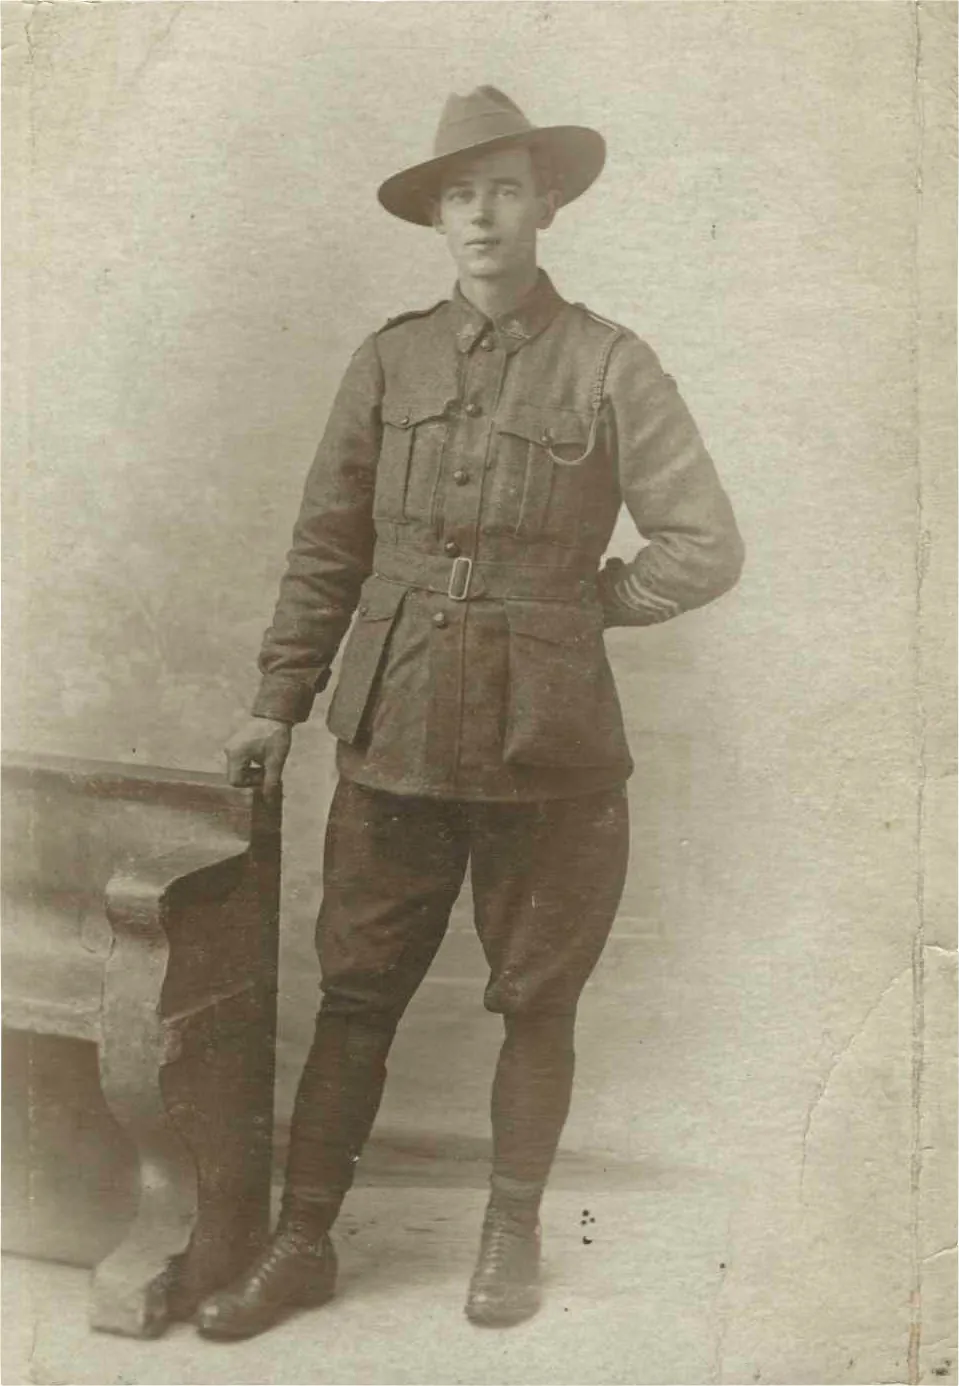 Black and white photograph of a young man in Australian army uniform with a broad-brimmed hat